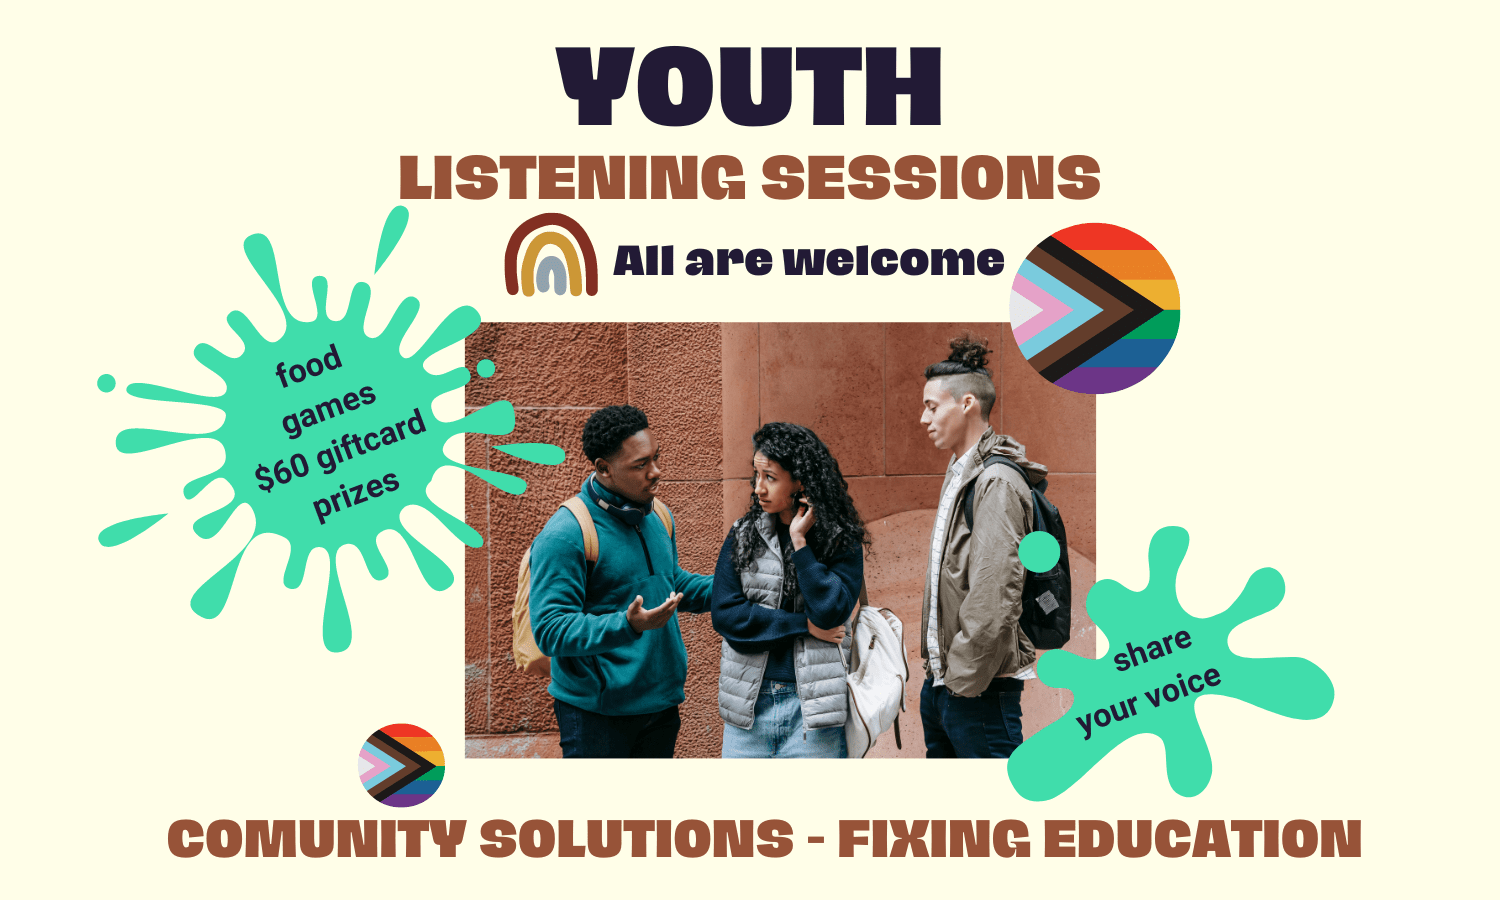 Photo of 3 young people in school. Text reads: Youth Listening Session – All Are Welcome - Community Solutions – Fixing Education. First splash of sea-green color contains this text: food / games / $60 giftcards / prizes. Second splash of color says: share your voice.